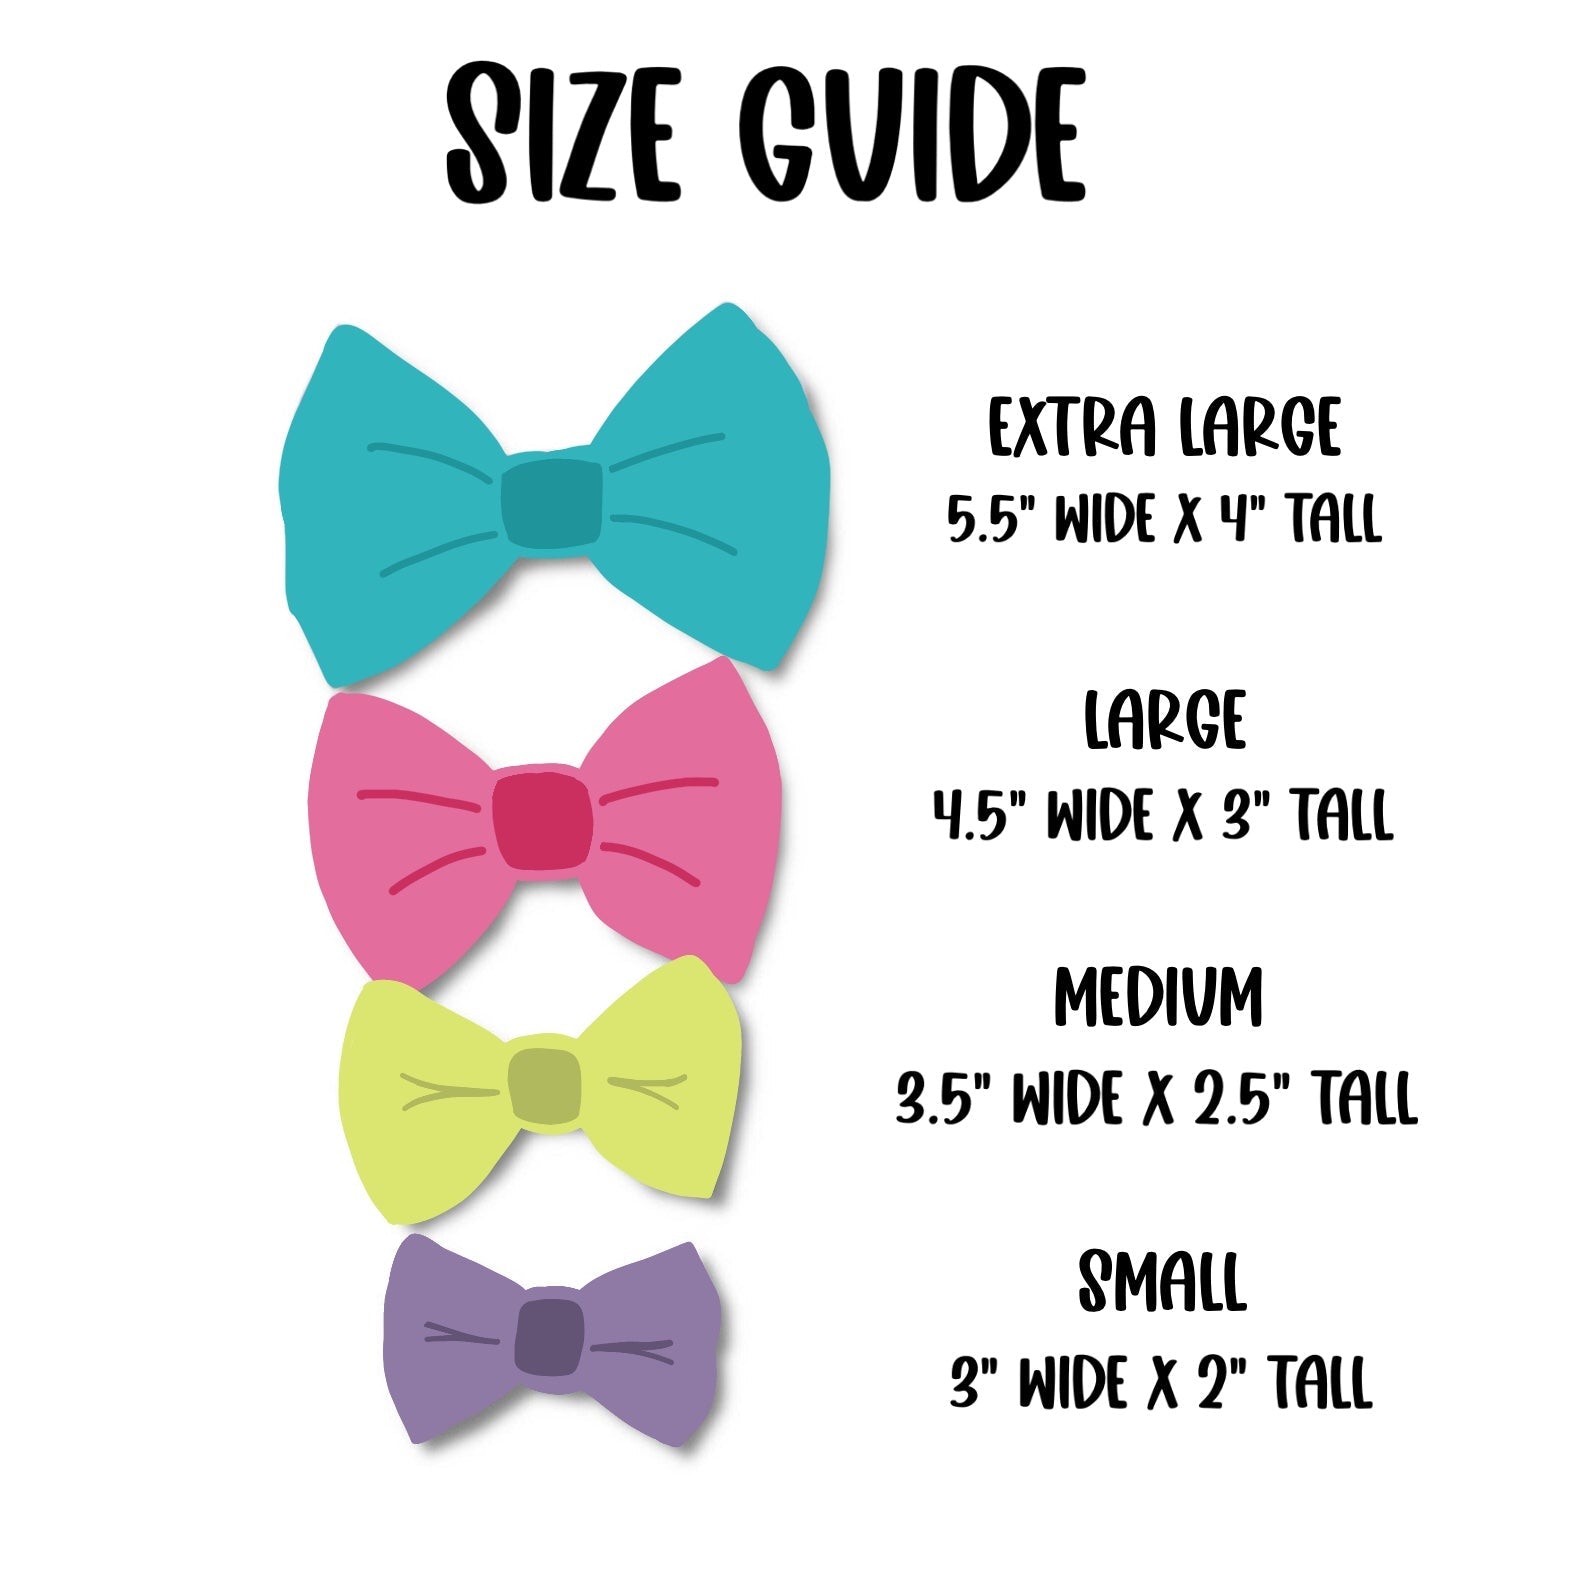 Handsome Houndstooth Bow - The Paw Pack Goods